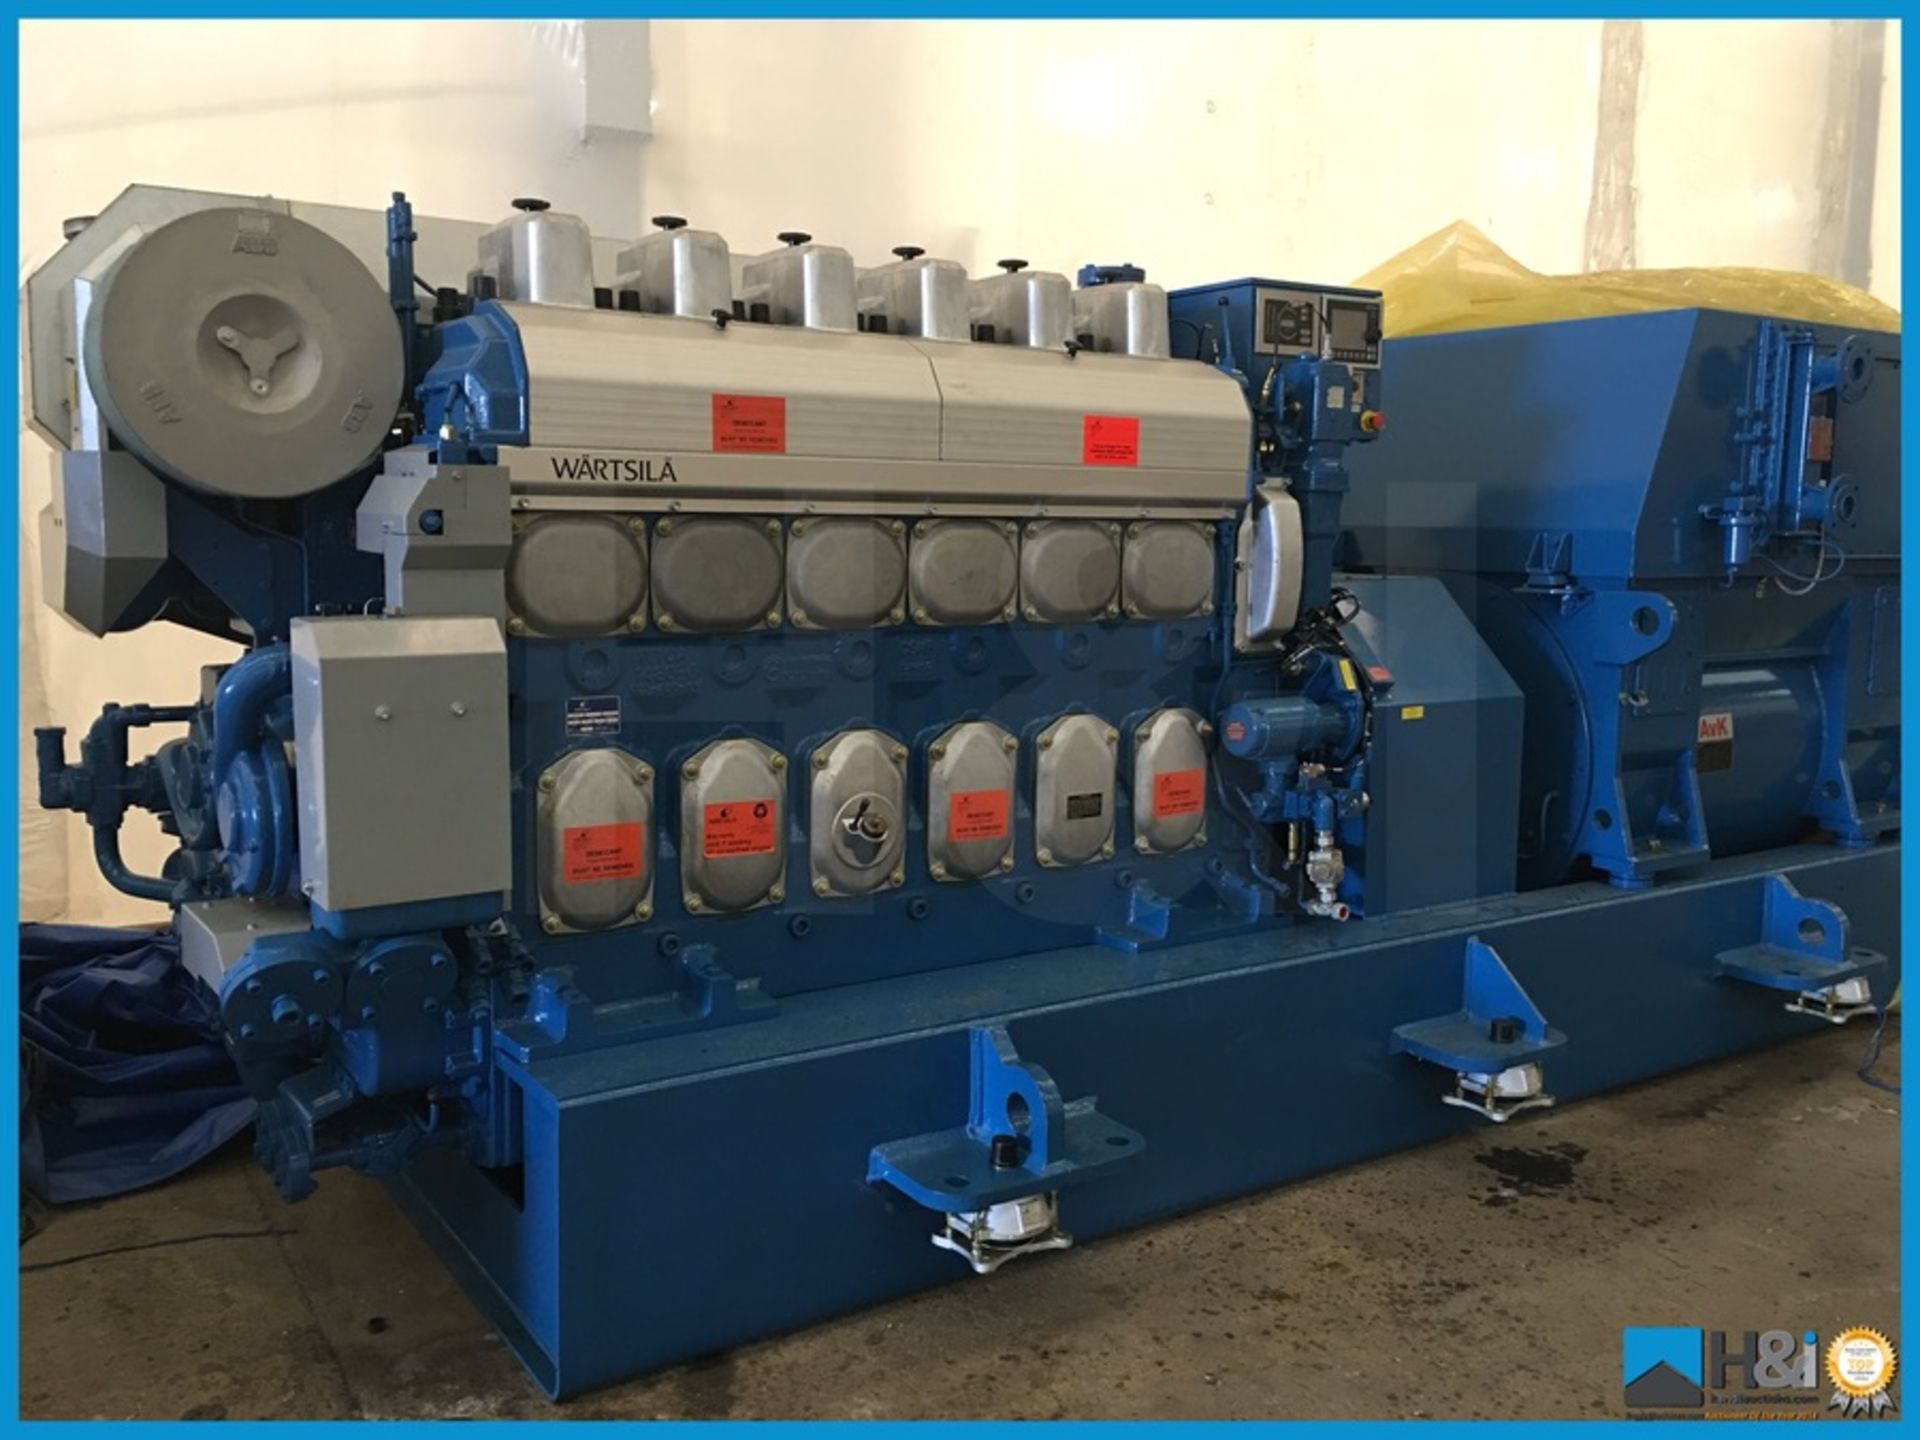 Unused Wartsila 6L20 high capacity diesel generator manufactured in 2013 for a large marine - Image 2 of 22